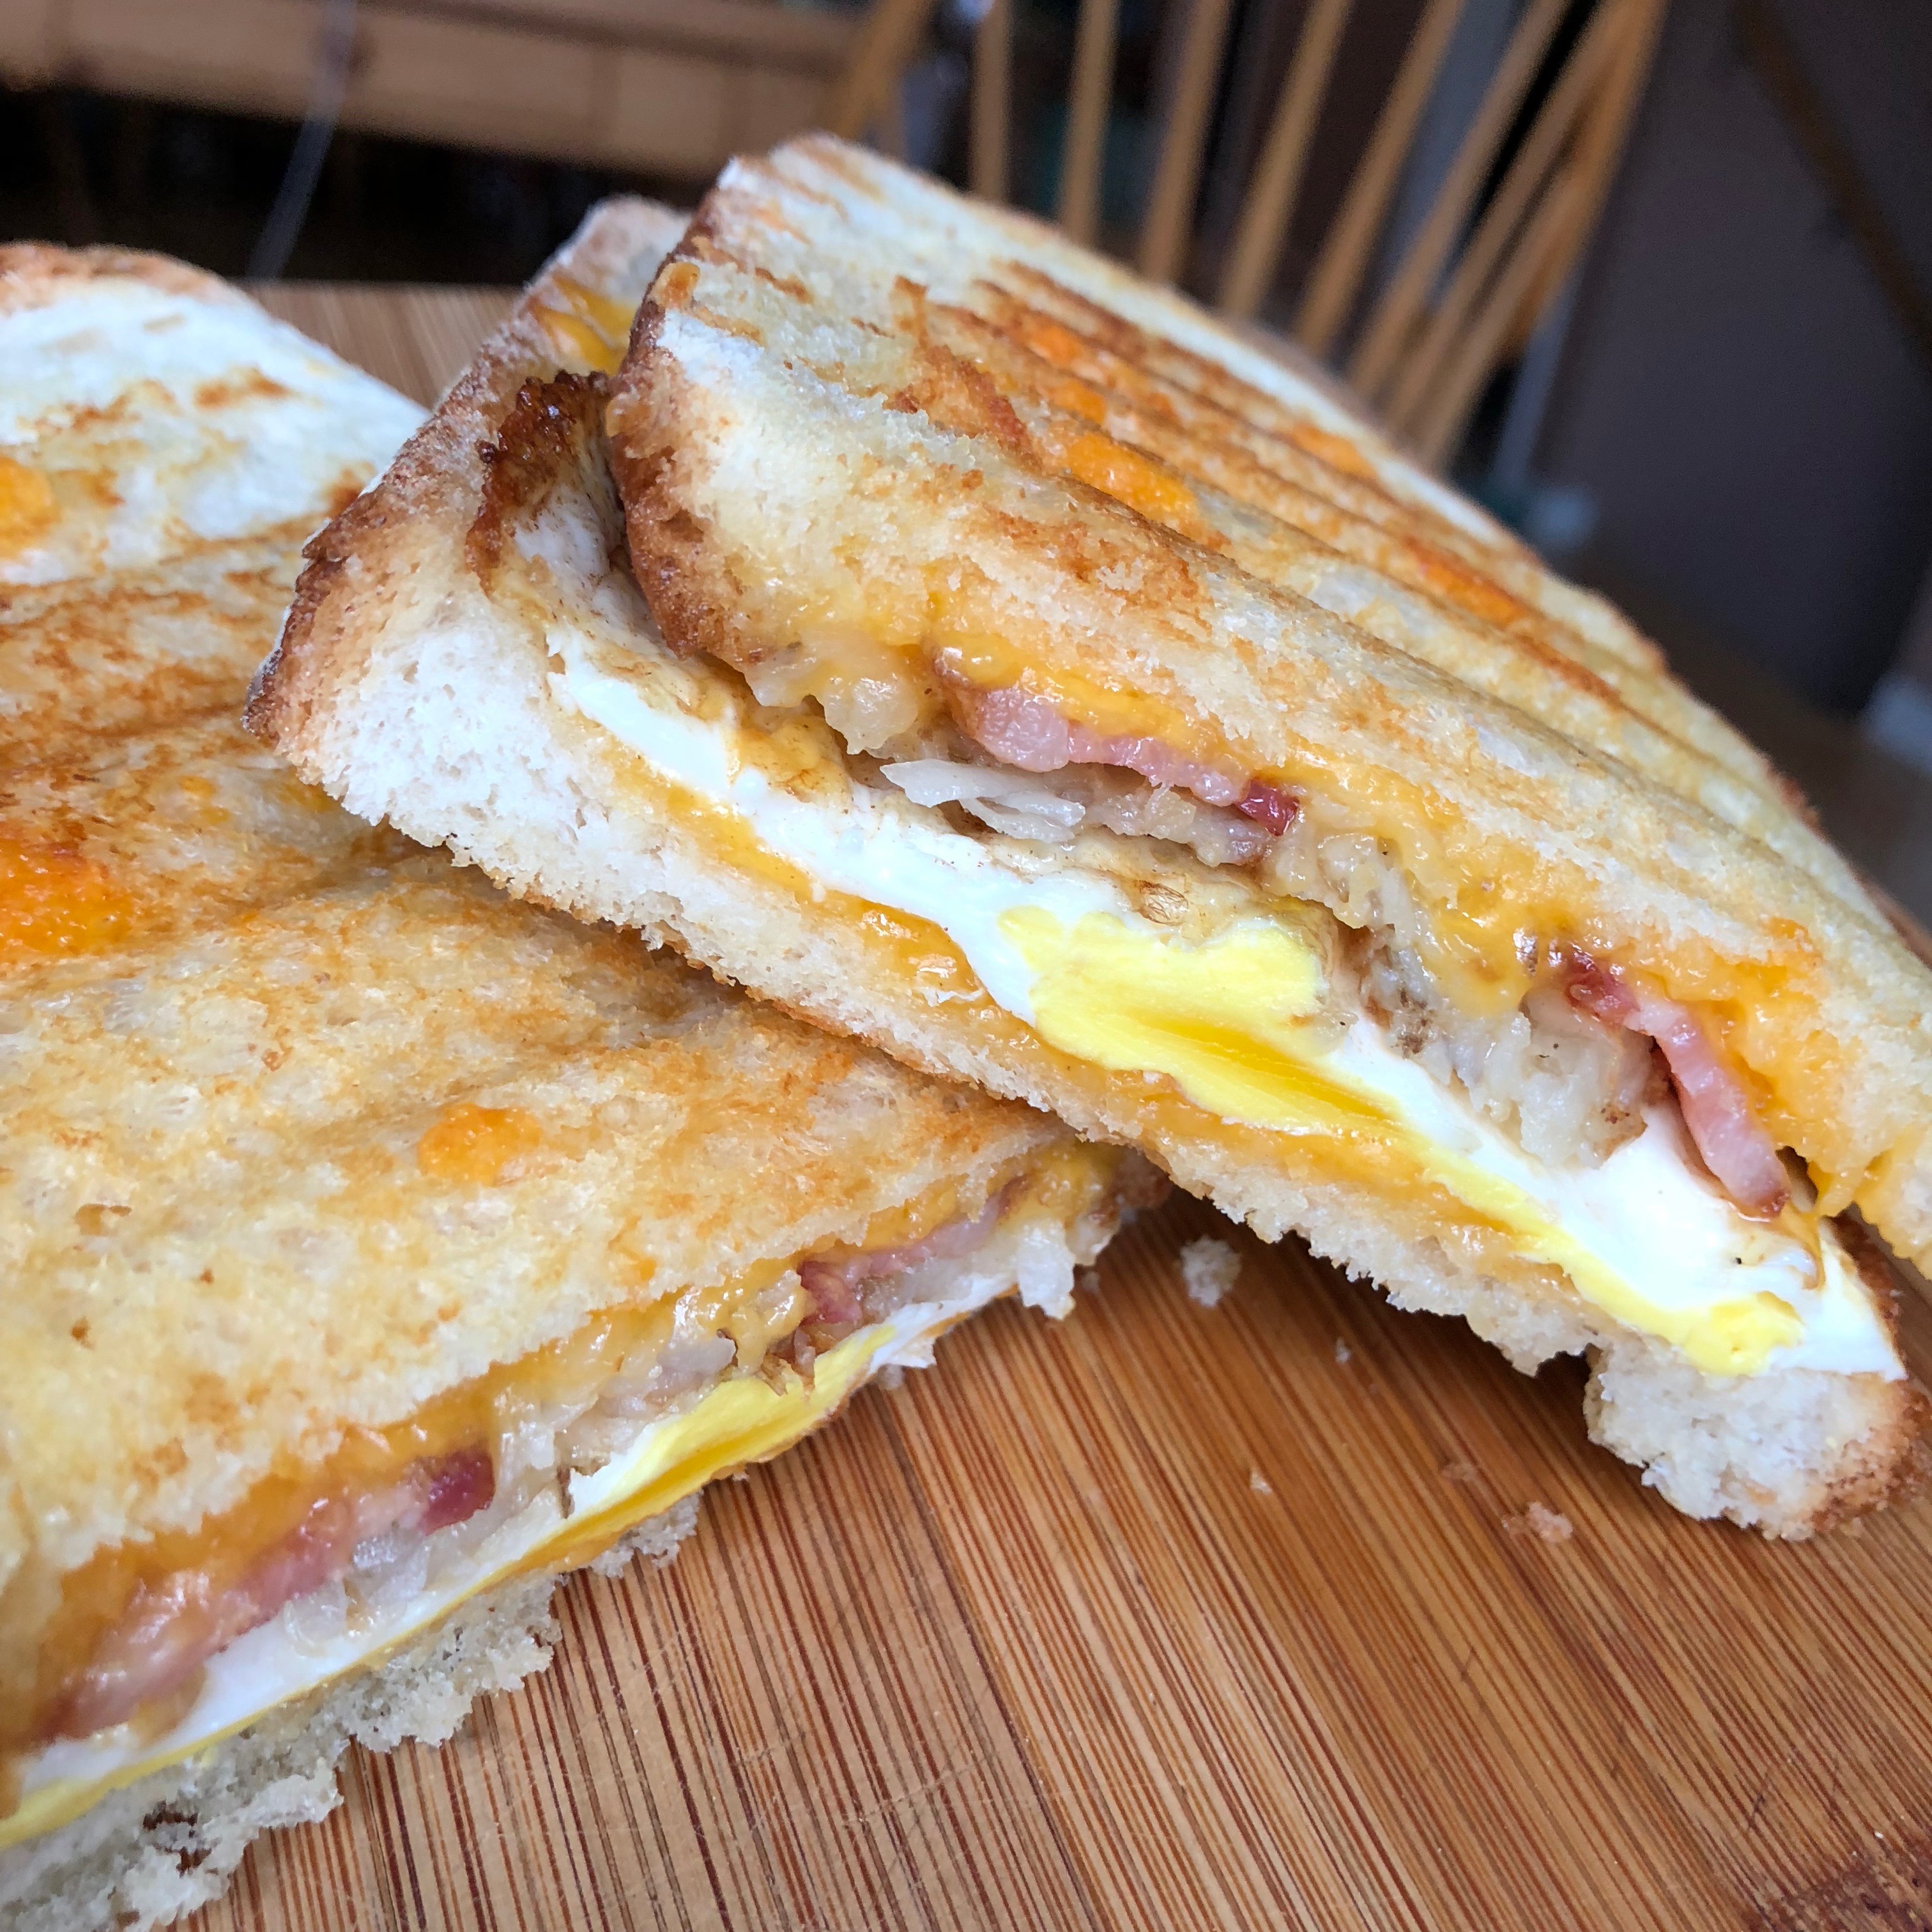 Breakfast Grilled Cheese on Pane Turano